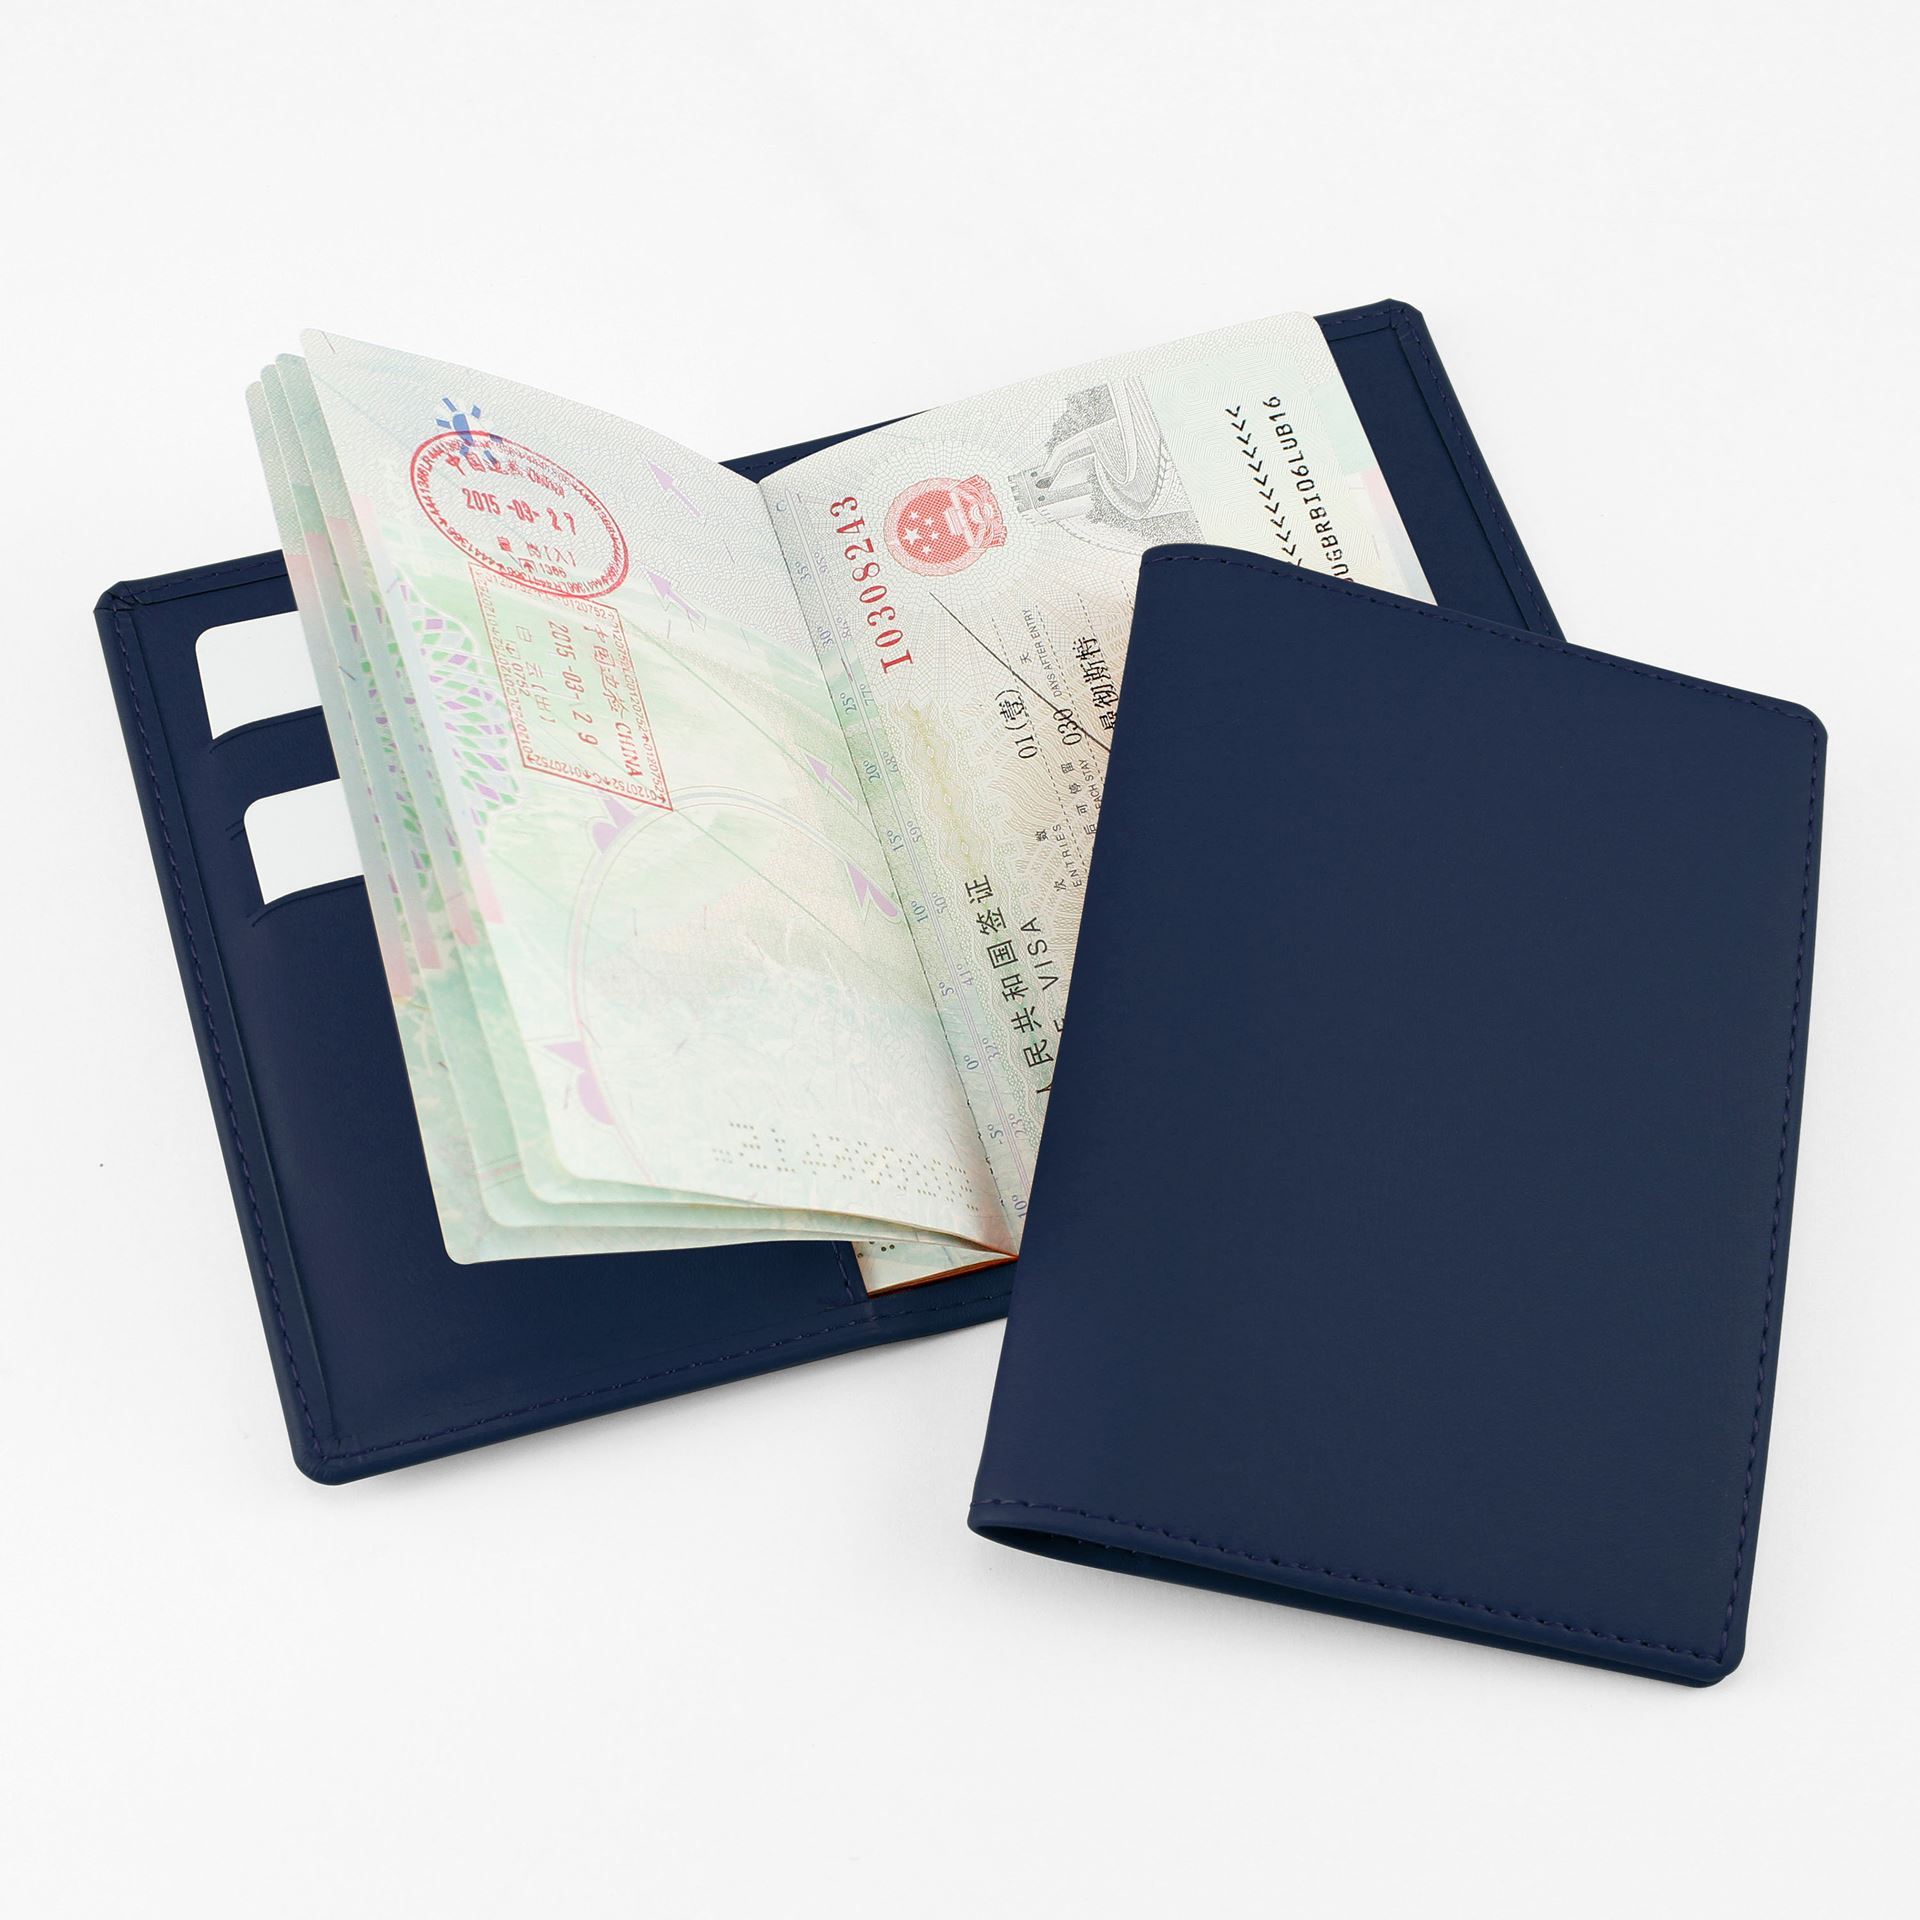 Porto Eco Express  Passport Case, in a Black or Navy.